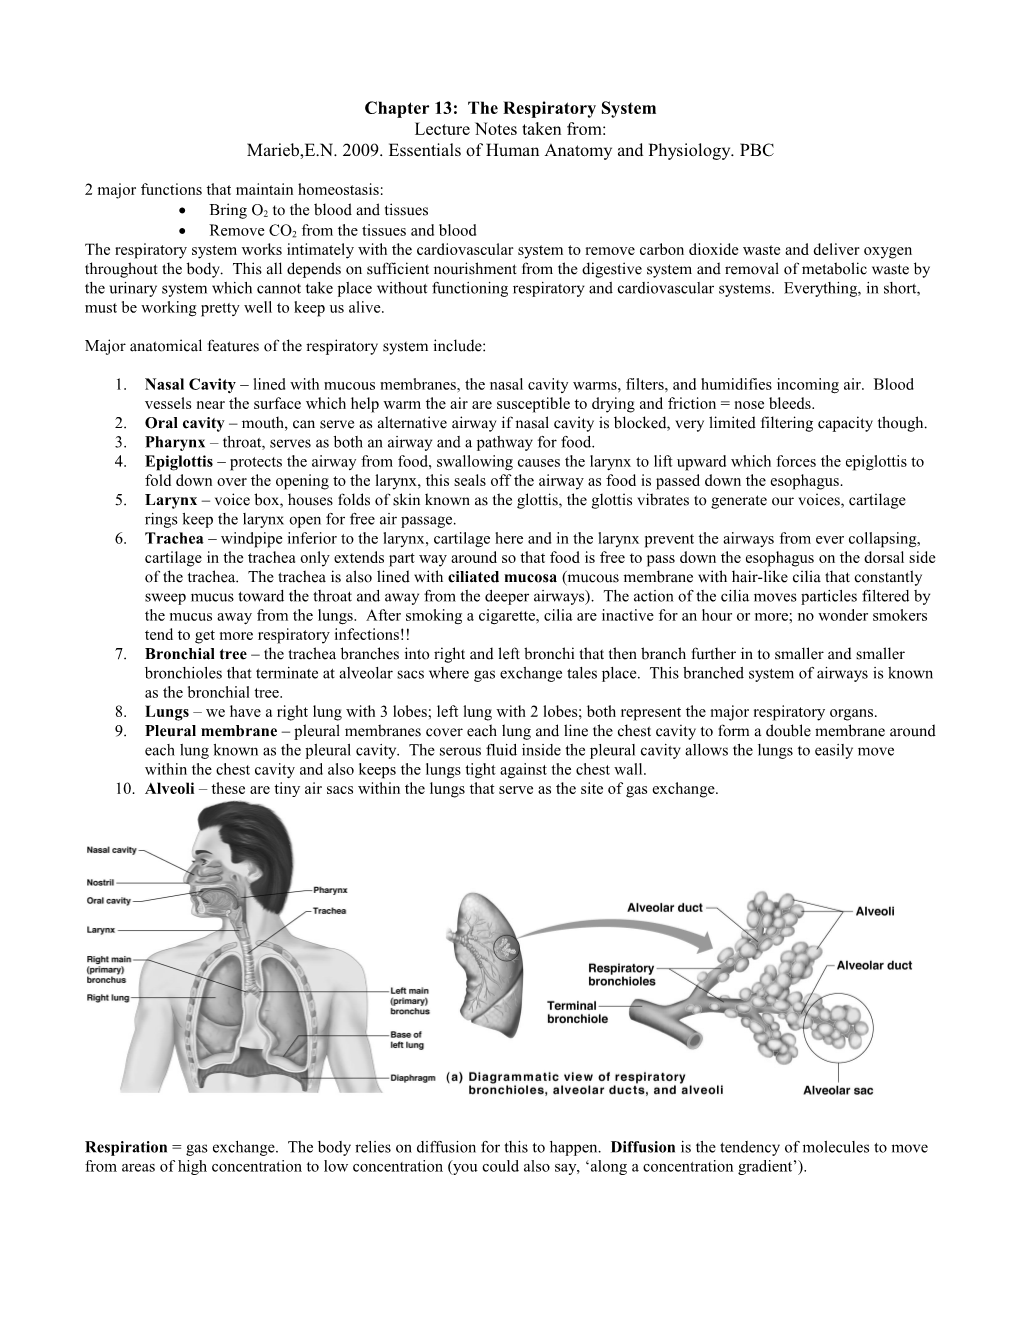 The Respiratory System: Basic Anatomy, Physiology, and Common Disorders